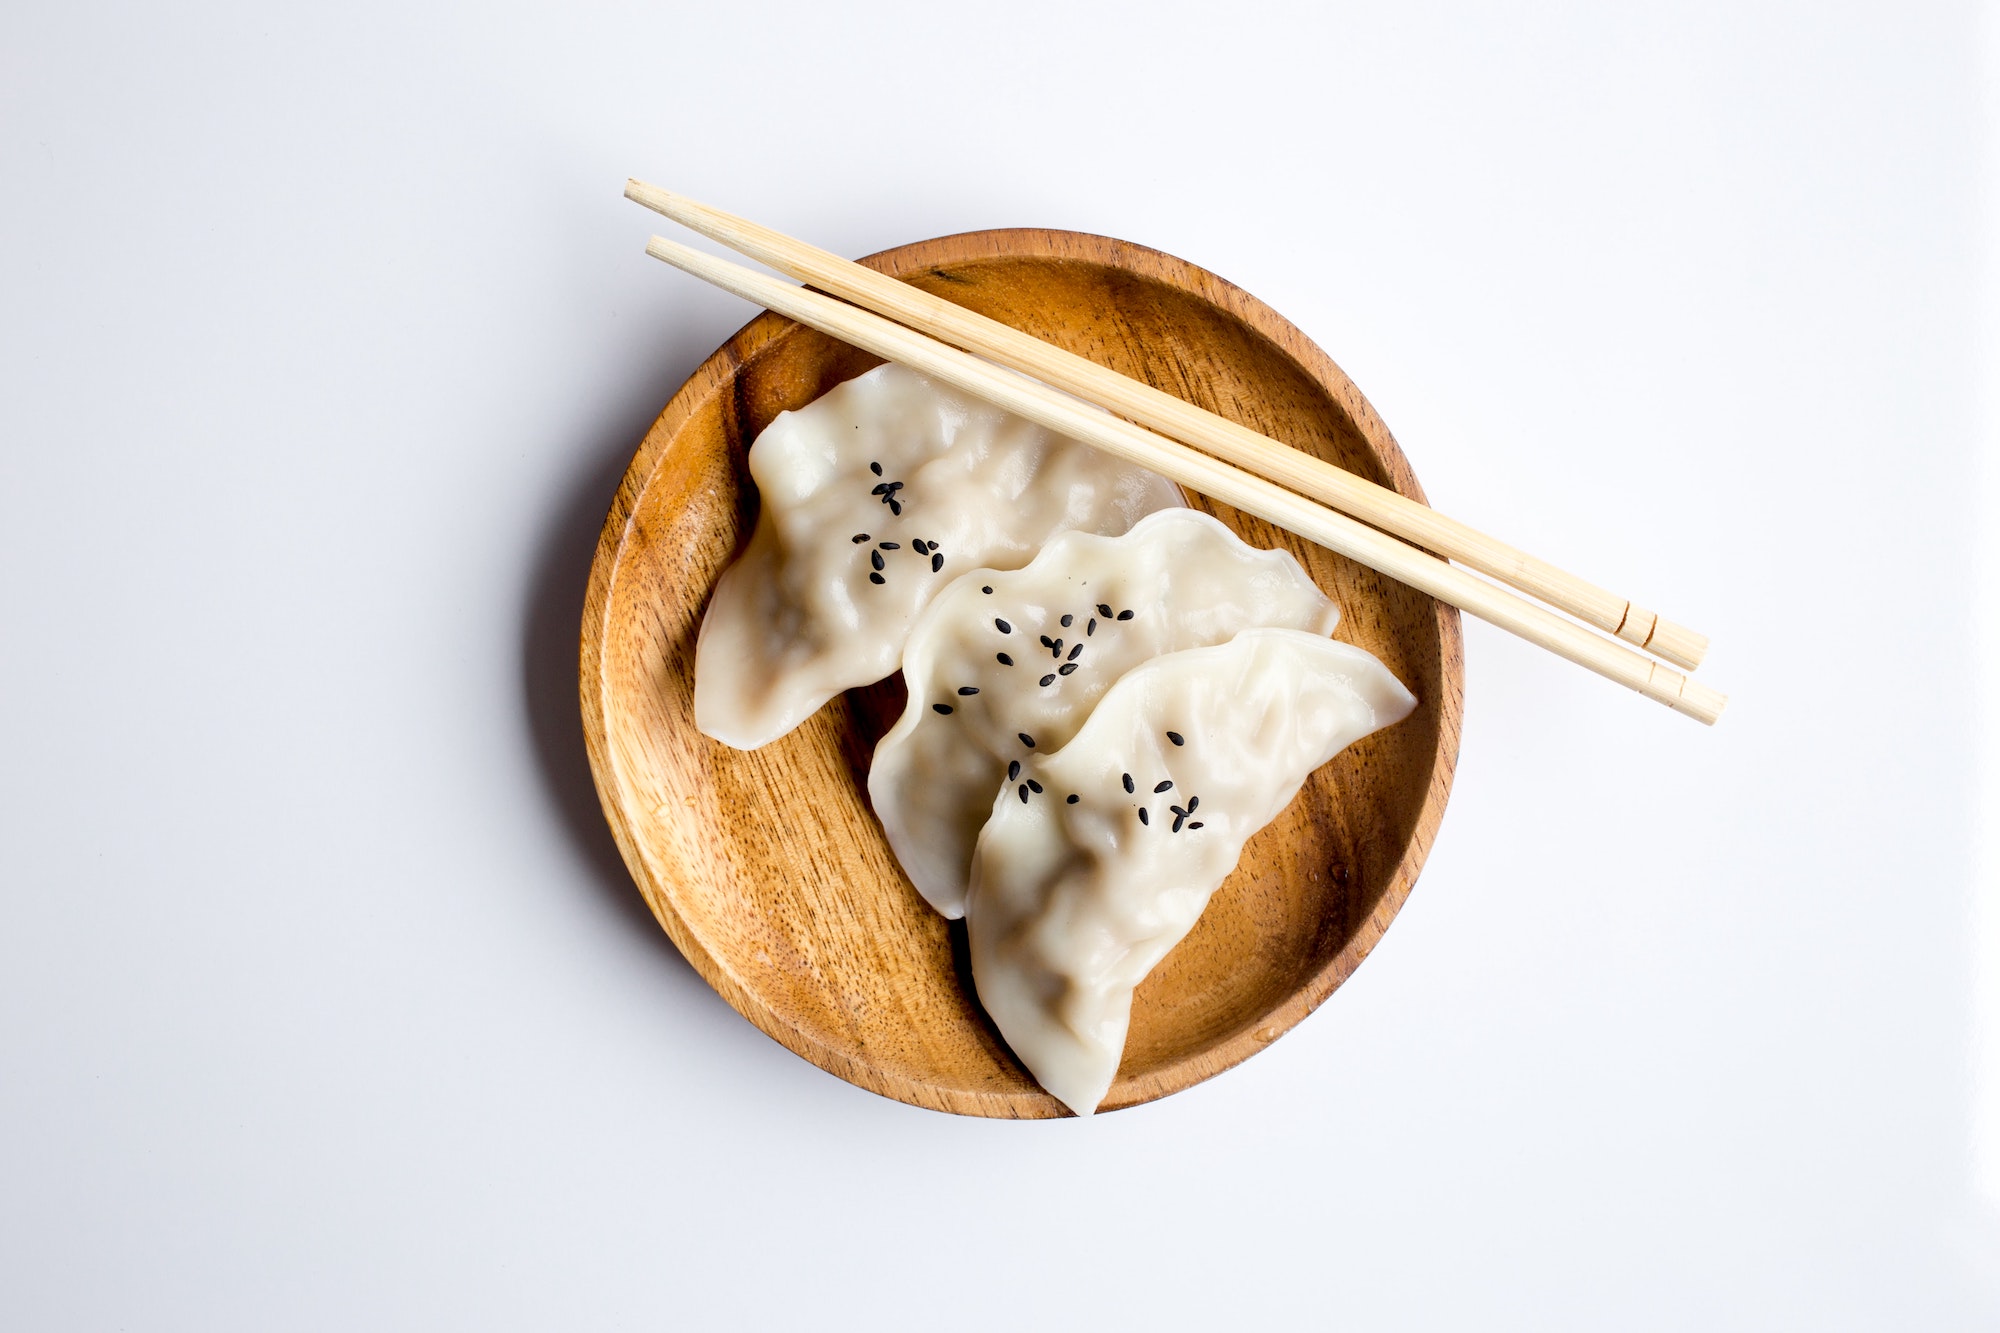 Despite its evolution, remember what dim sum (literally) means: to touch the heart